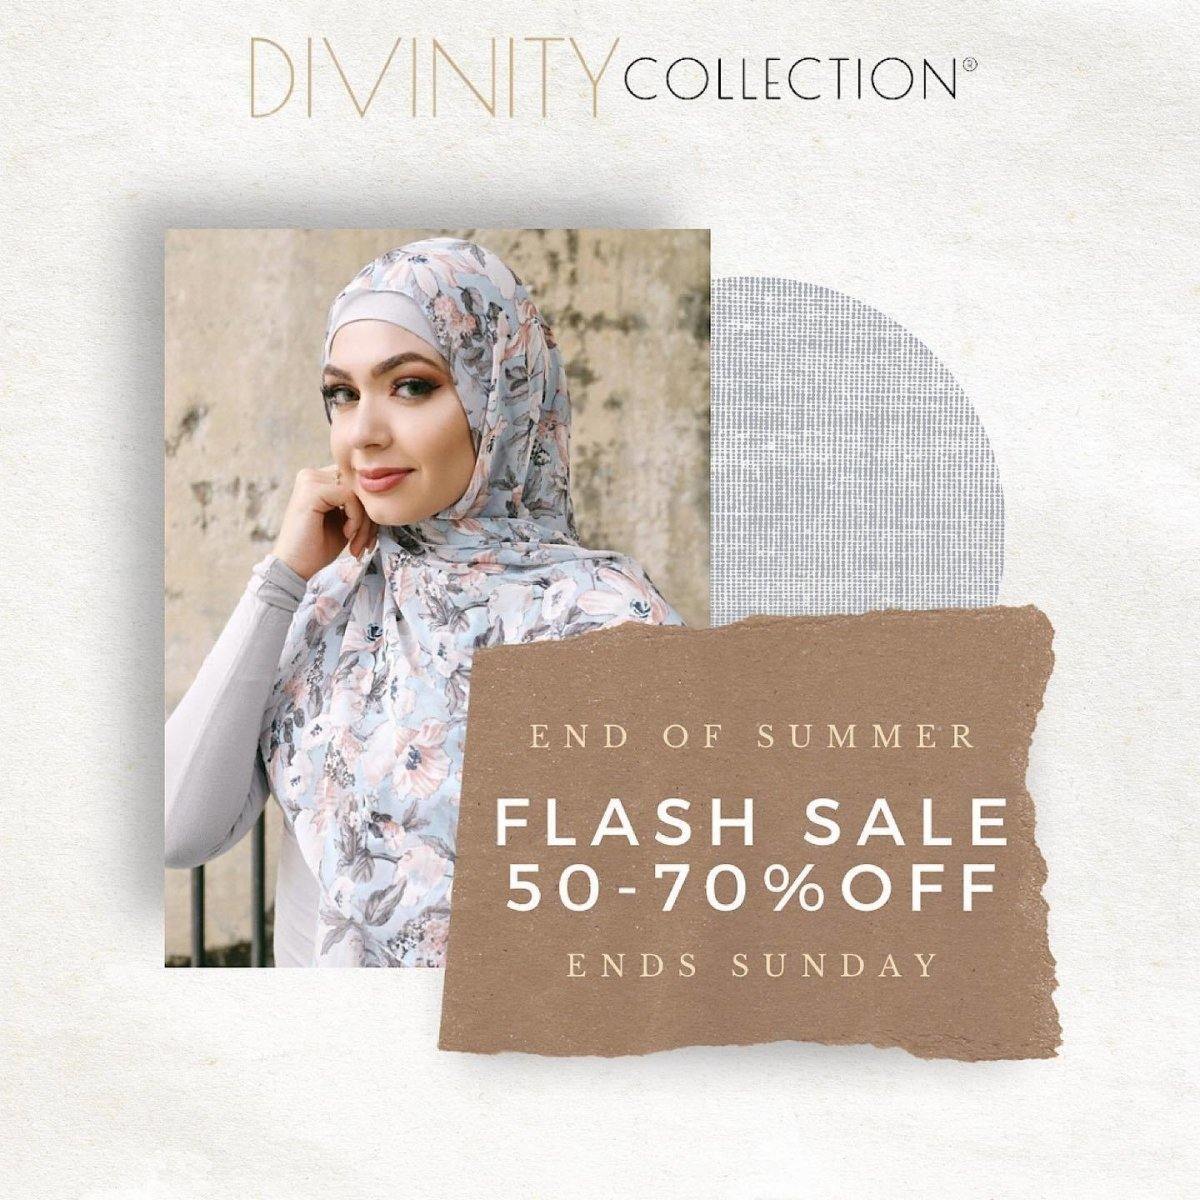 On Now.

https://www.divinitycollection.com.au/collections/flash-sale... - Divinity Collection